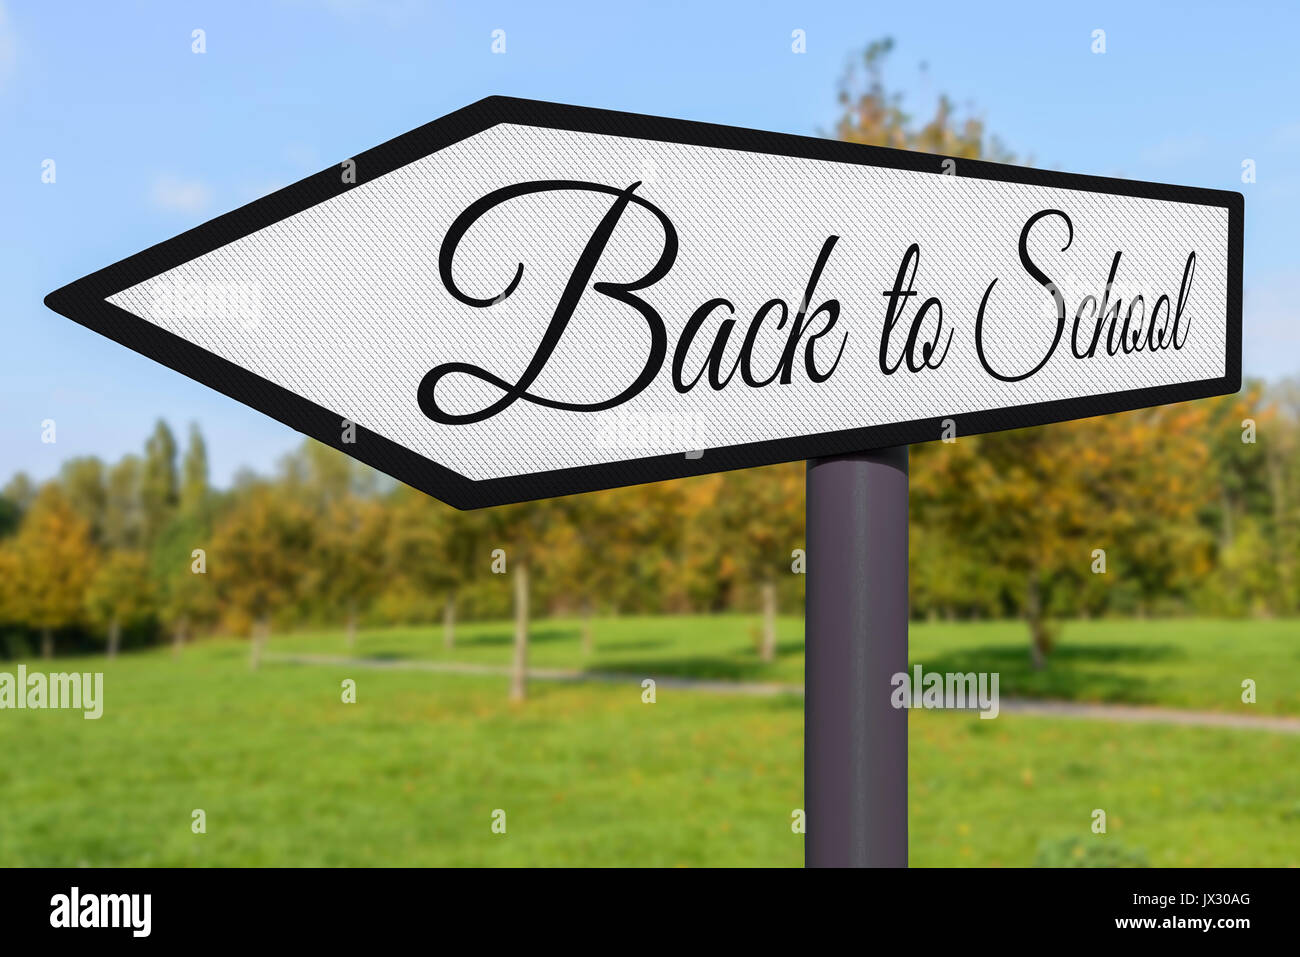 Back to School sign. Stock Photo